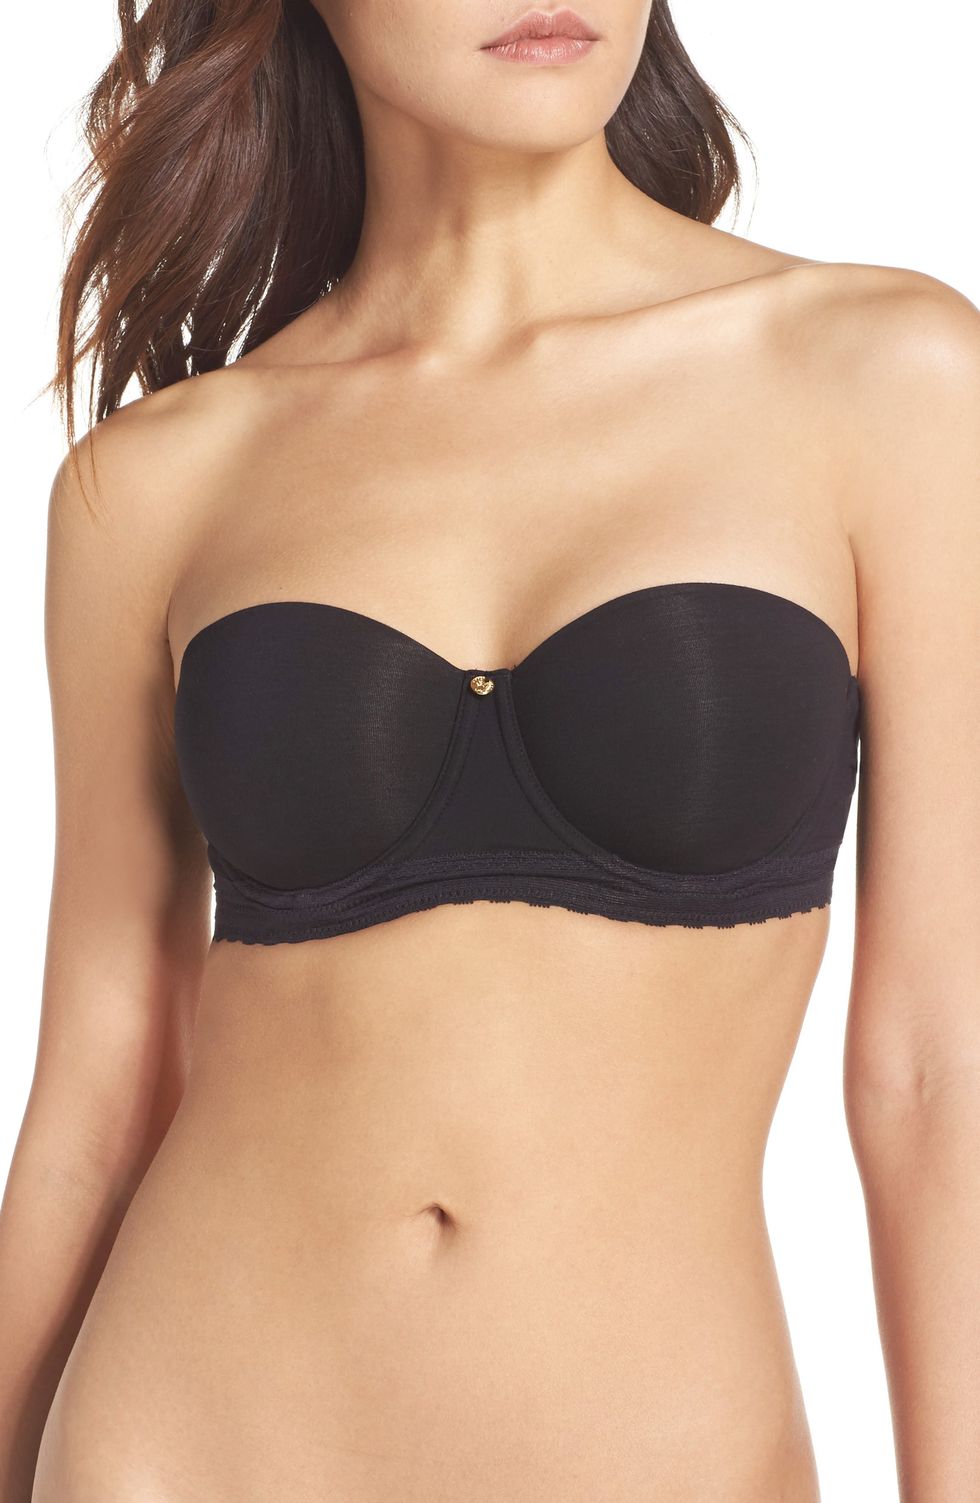 Found: A Strapless Bra and Shapewear That Won't Fall Down